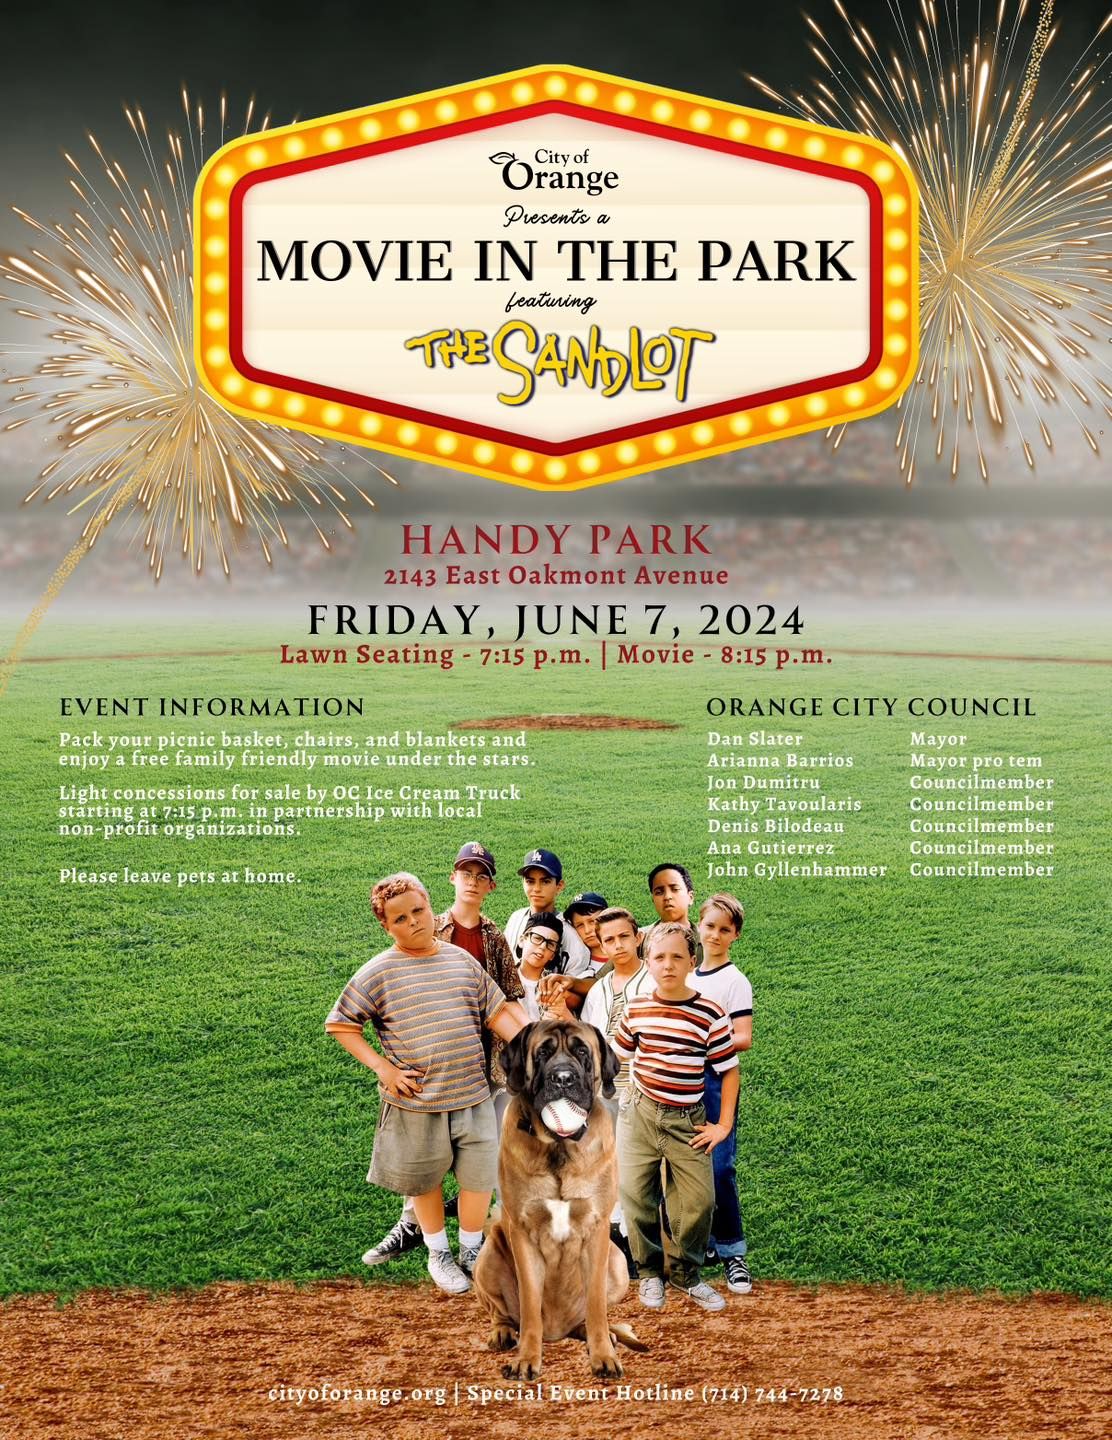 Movie in the Park featuring The Sandlot